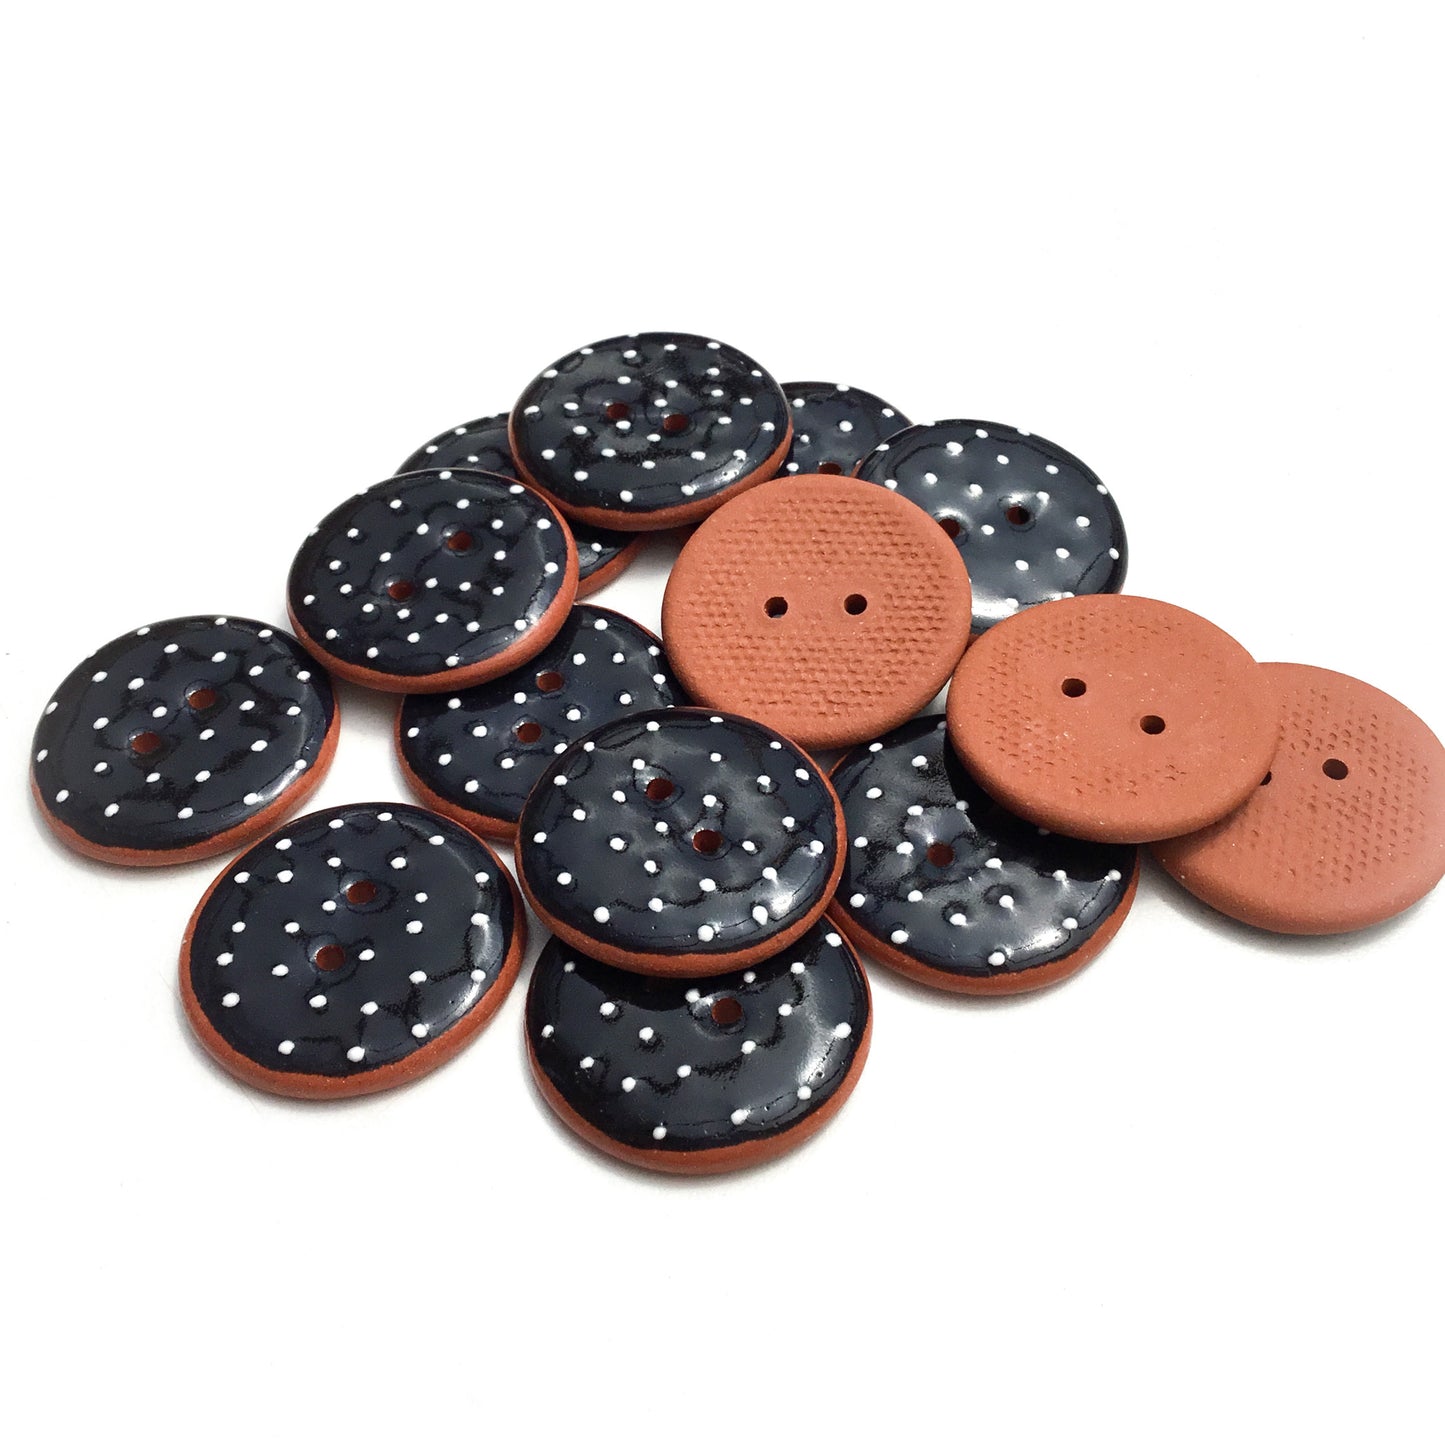 Black & White Polka Dots on Red Clay - 1 1/16"